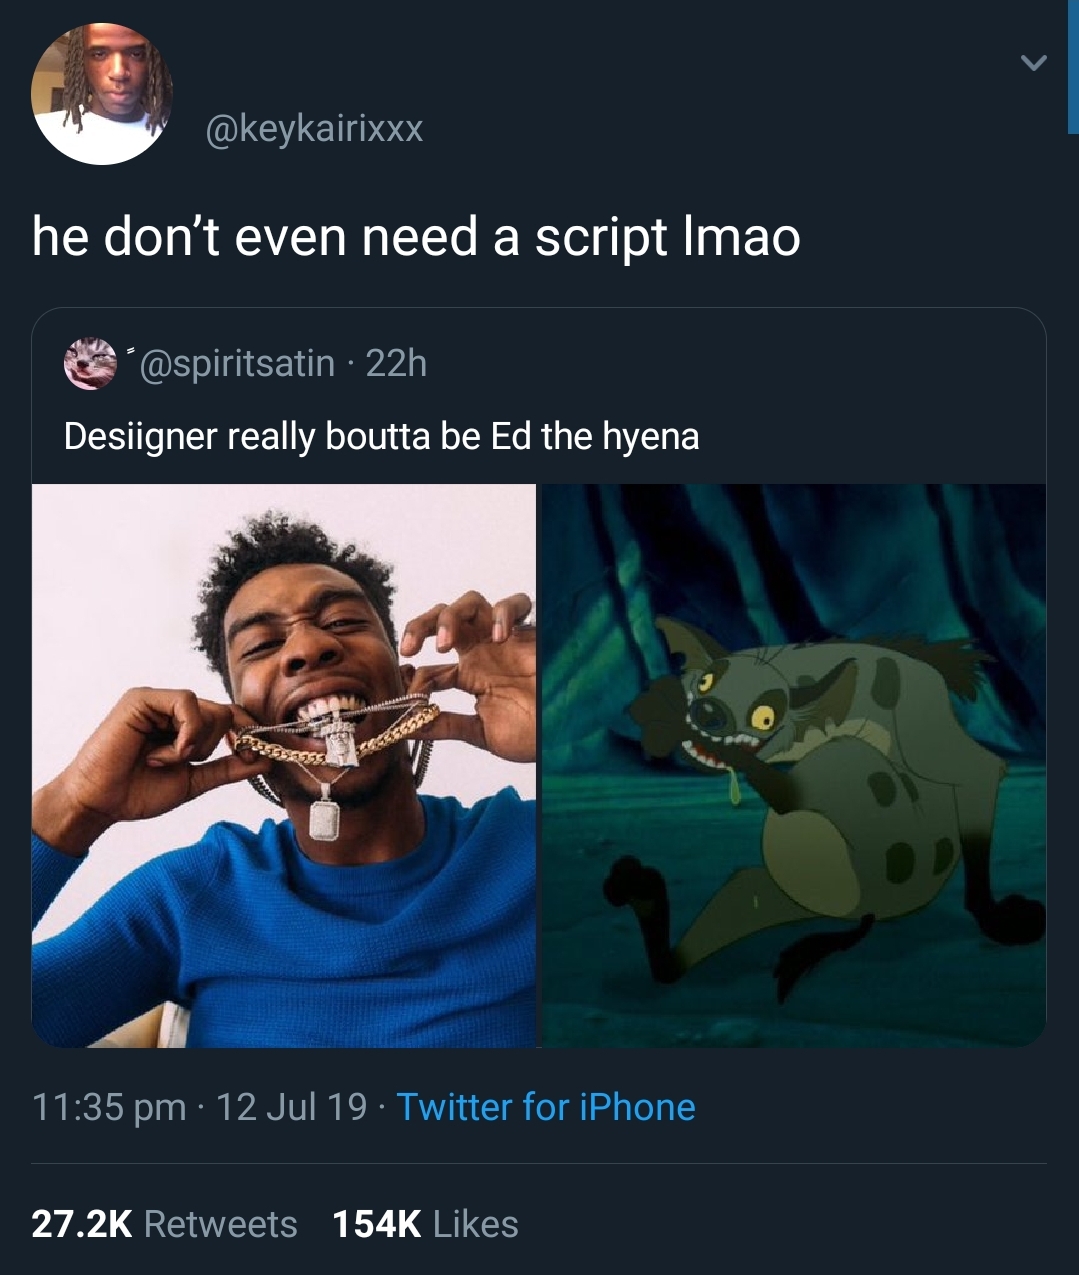 ed lion king - he don't even need a script Imao 22h Desiigner really boutta be Ed the hyena 12 Jul 19. Twitter for iPhone